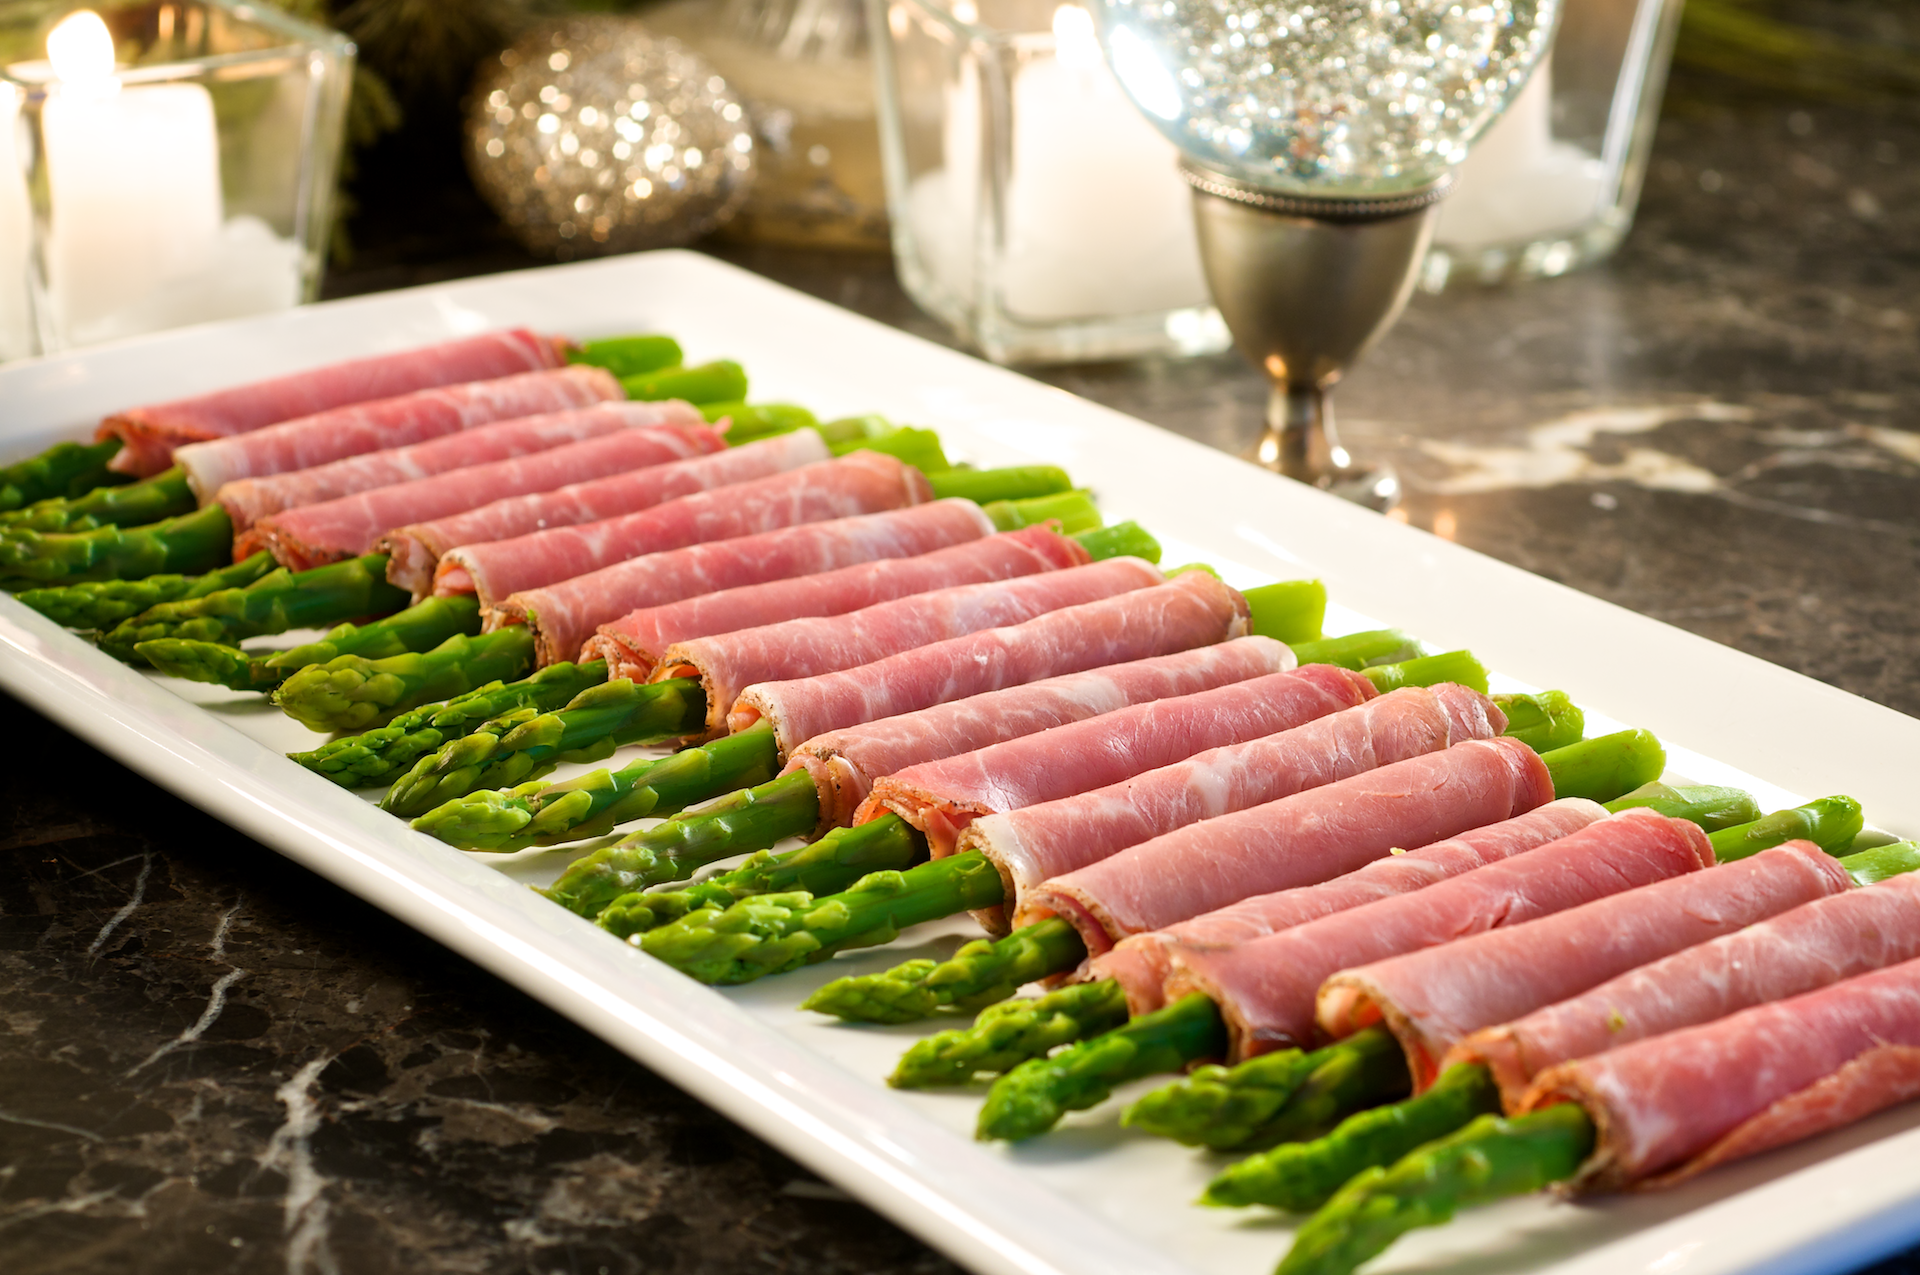 This simple and fresh appetizer adds color and nurtrition to your buffet table! The salty, slightly chewy, prosciutto is perfect to complement the al dente asparagus.